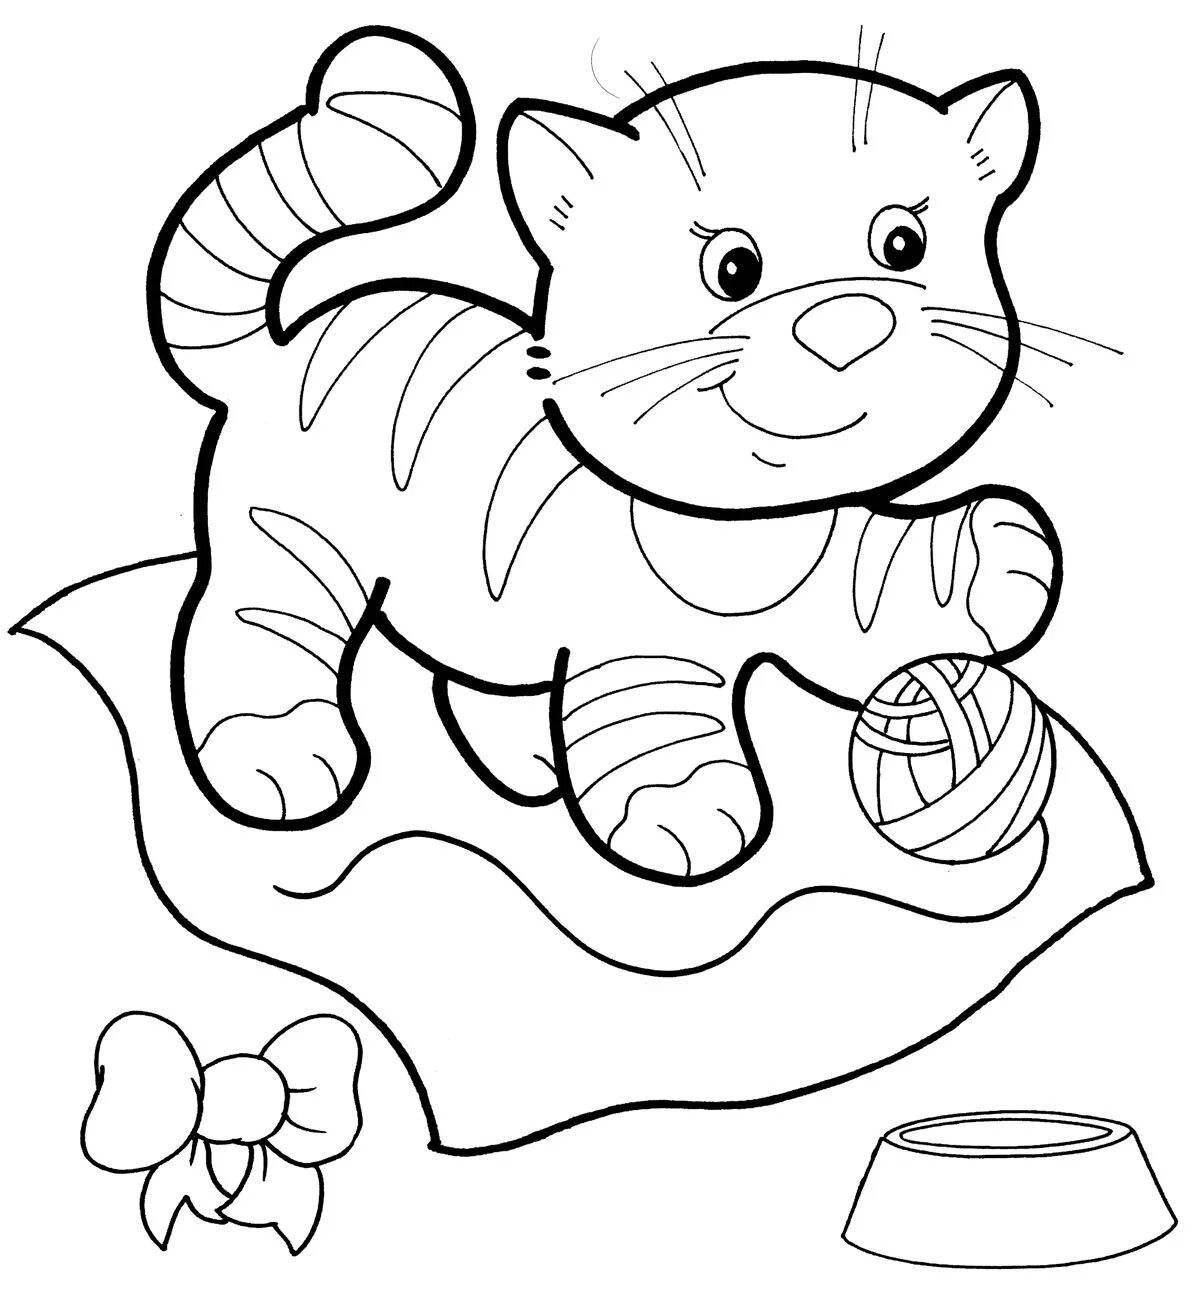 Snuggable coloring page baby kittens